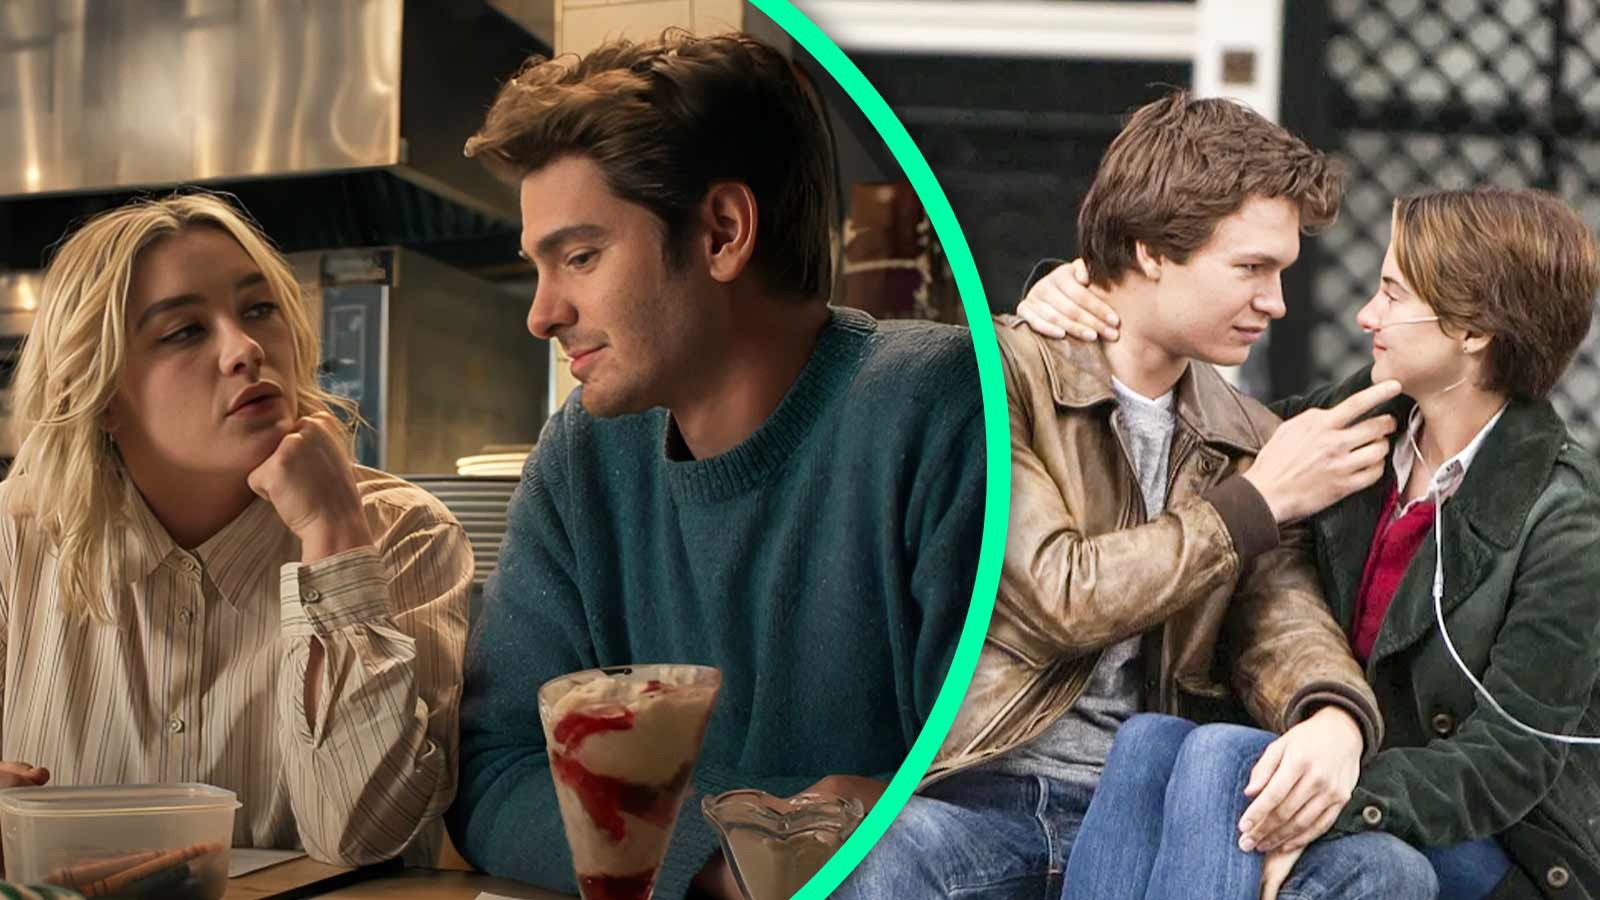 “This is going to ruin me”: Andrew Garfield and Florence Pugh’s R-Rated Film Brings Up an Old Scar for ‘The Fault in Our Stars’ Fans